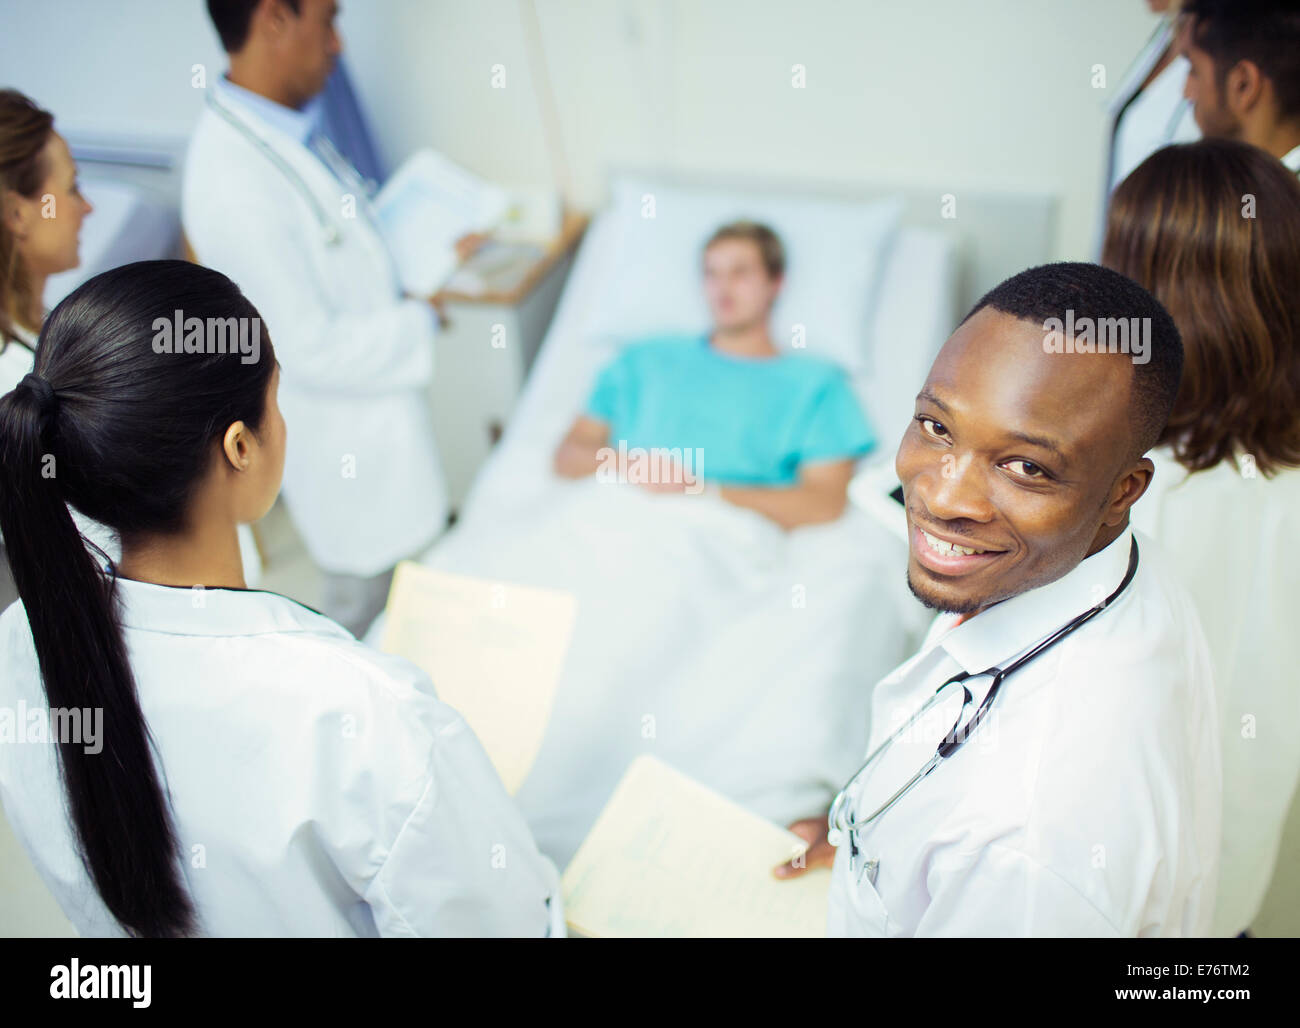 Doctor standing with residents in hospital room Stock Photo